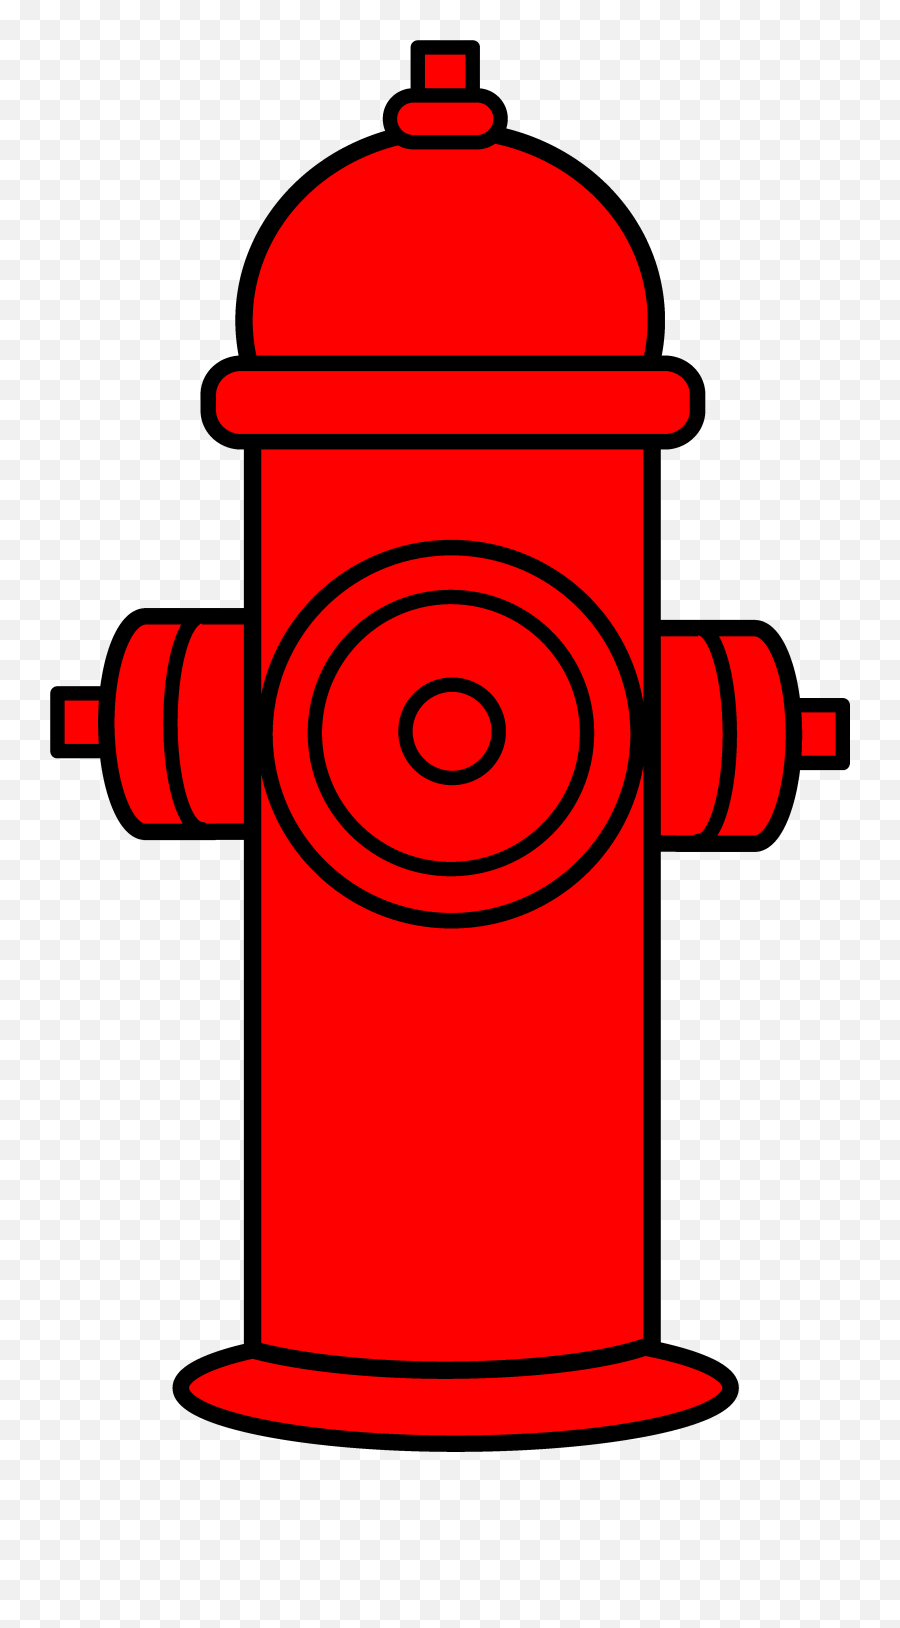 Fire Drawing - Clip Art Fire Hydrant Hd Png Download Fire Hydrant Clipart Emoji,Fire Gif Transparent Background